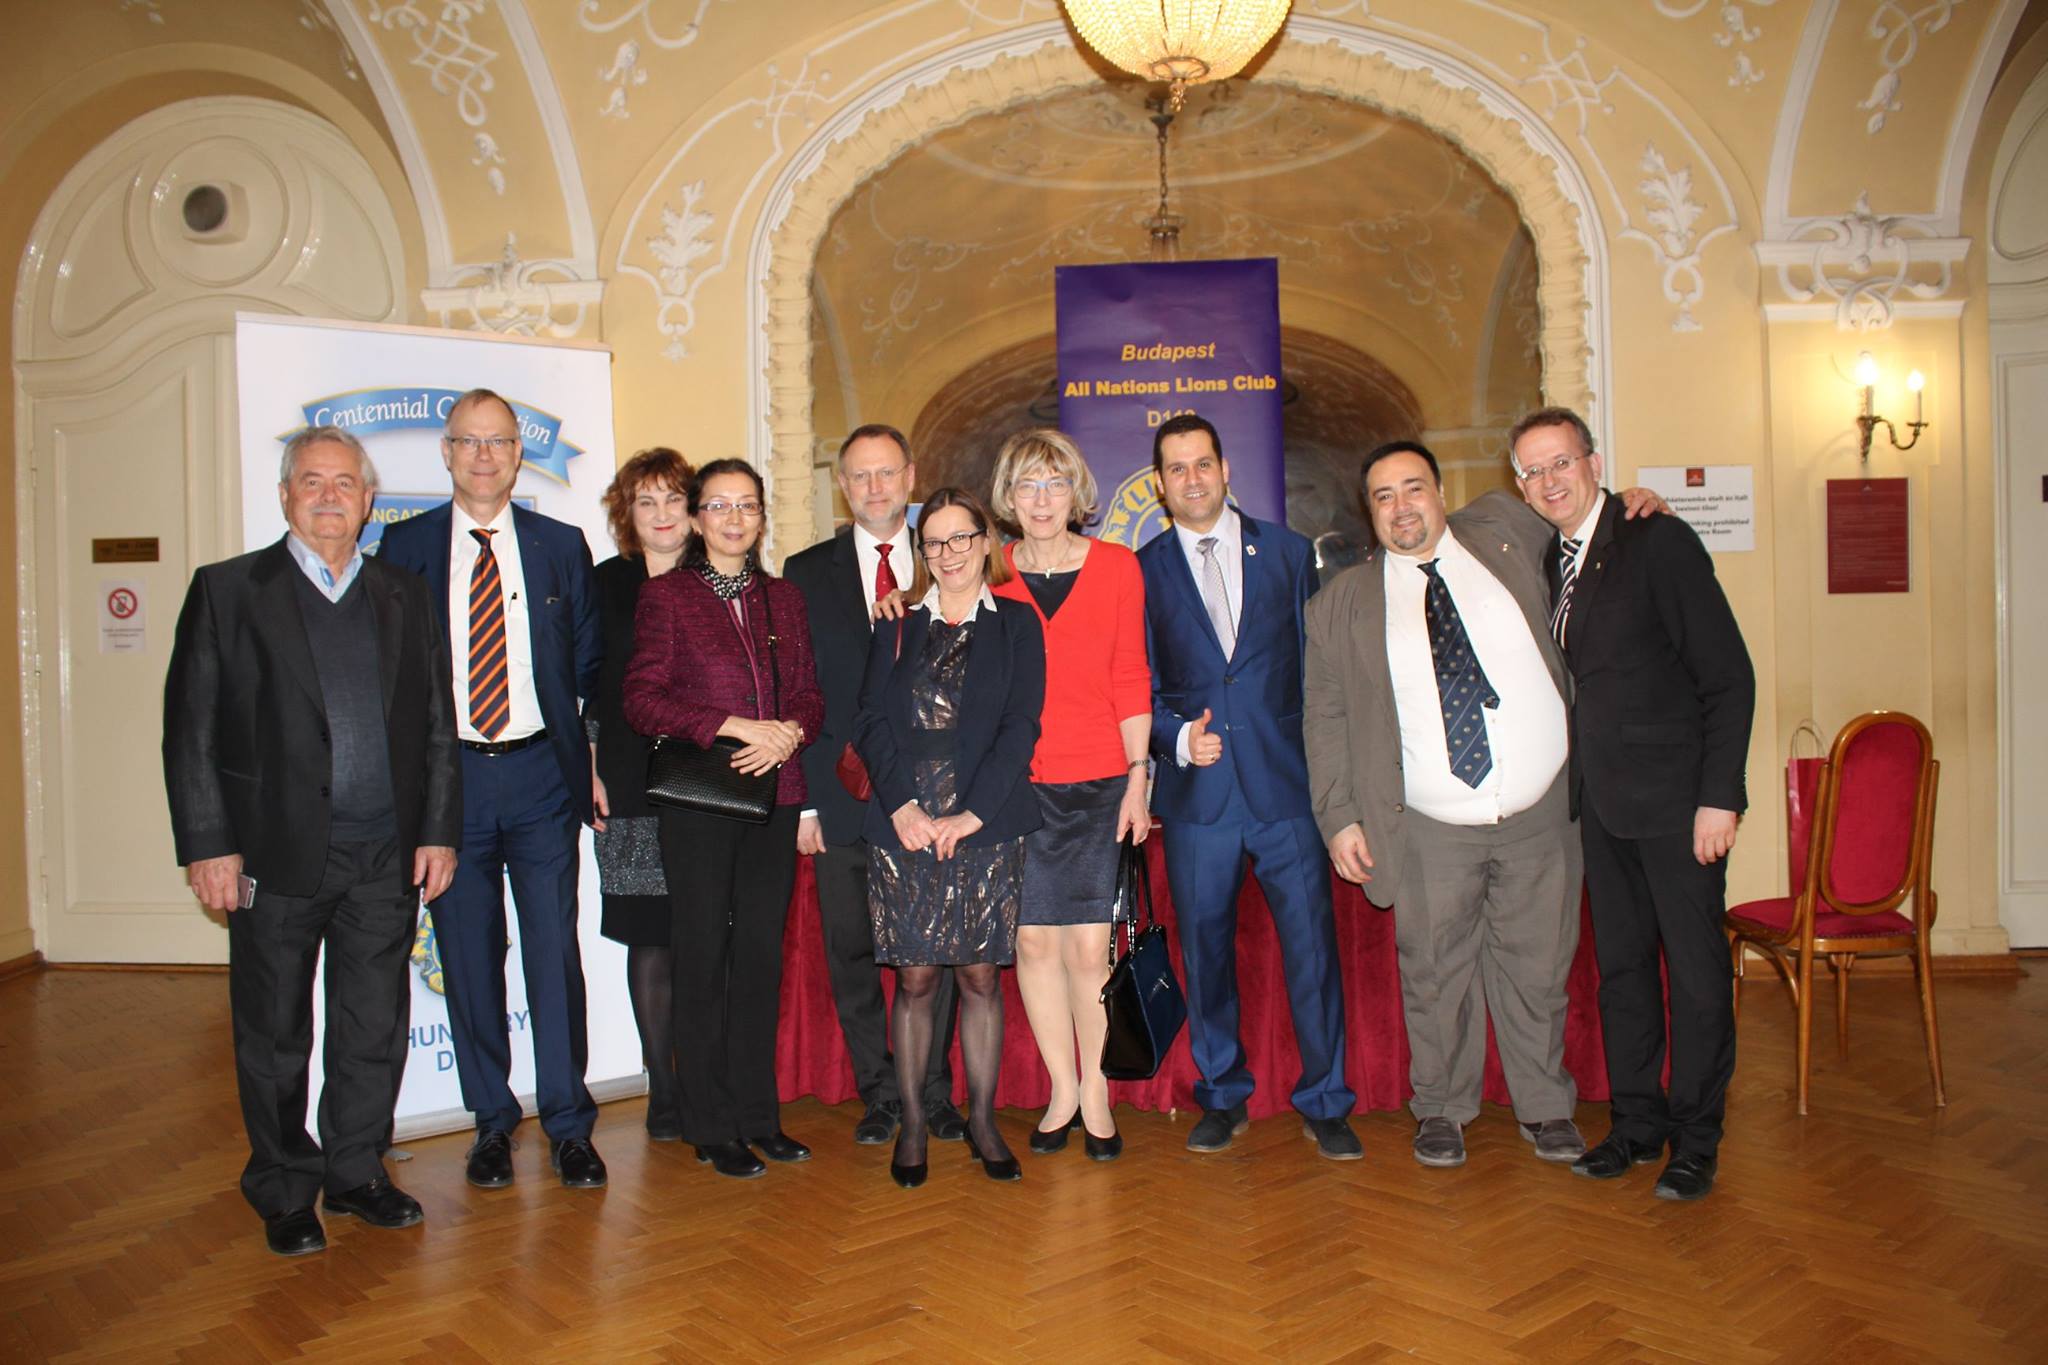 Charity Gala Concert Of All Nations Lions Club Budapest, 11 April